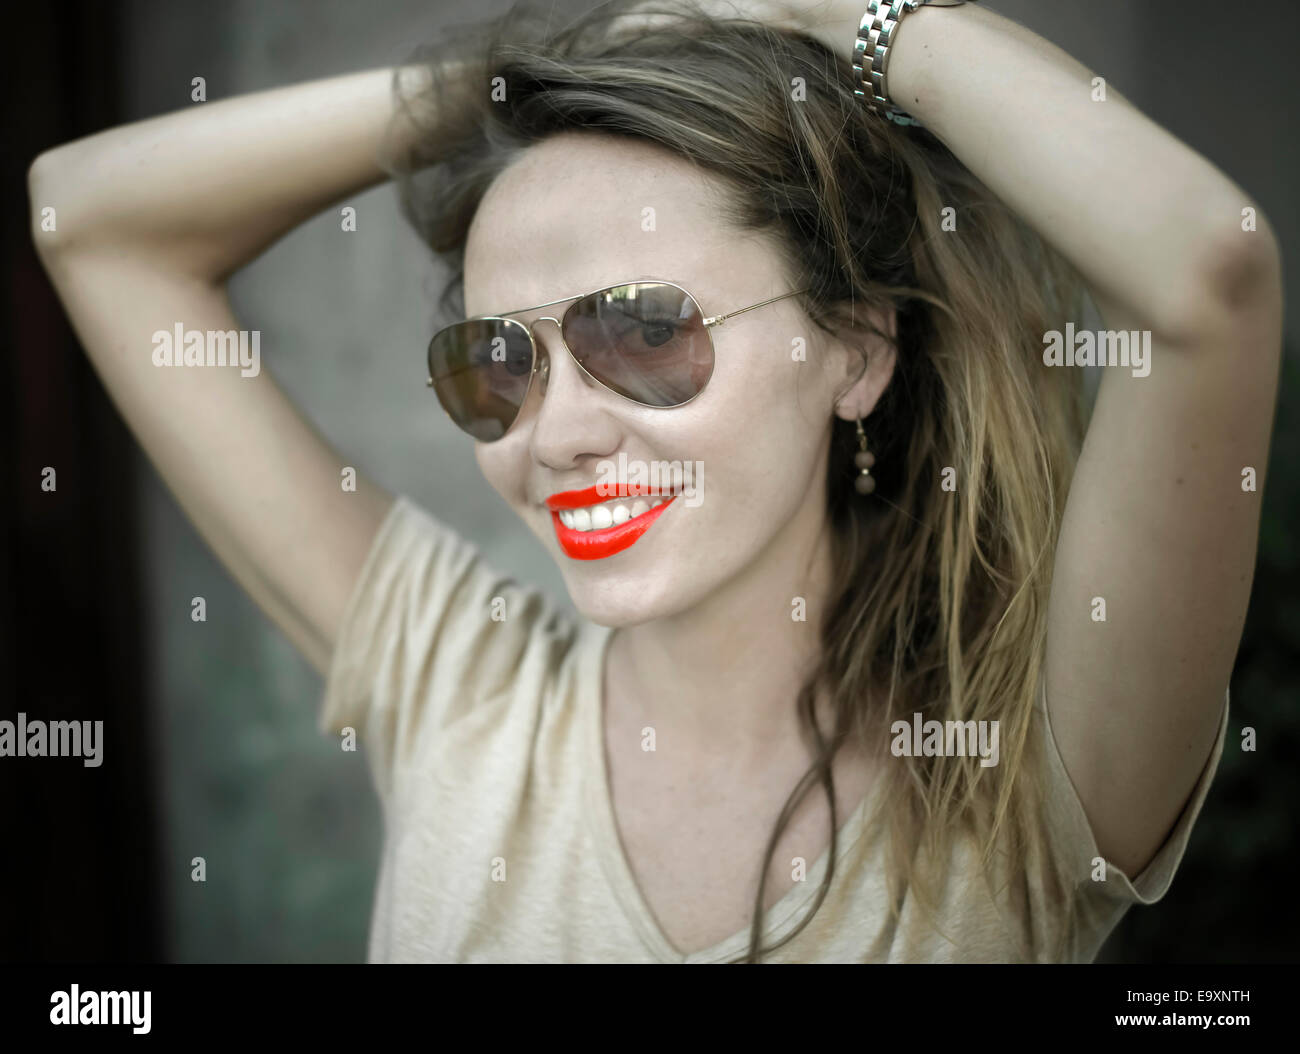 Portrait of Young Beautiful Woman with Red Lips Stock Photo